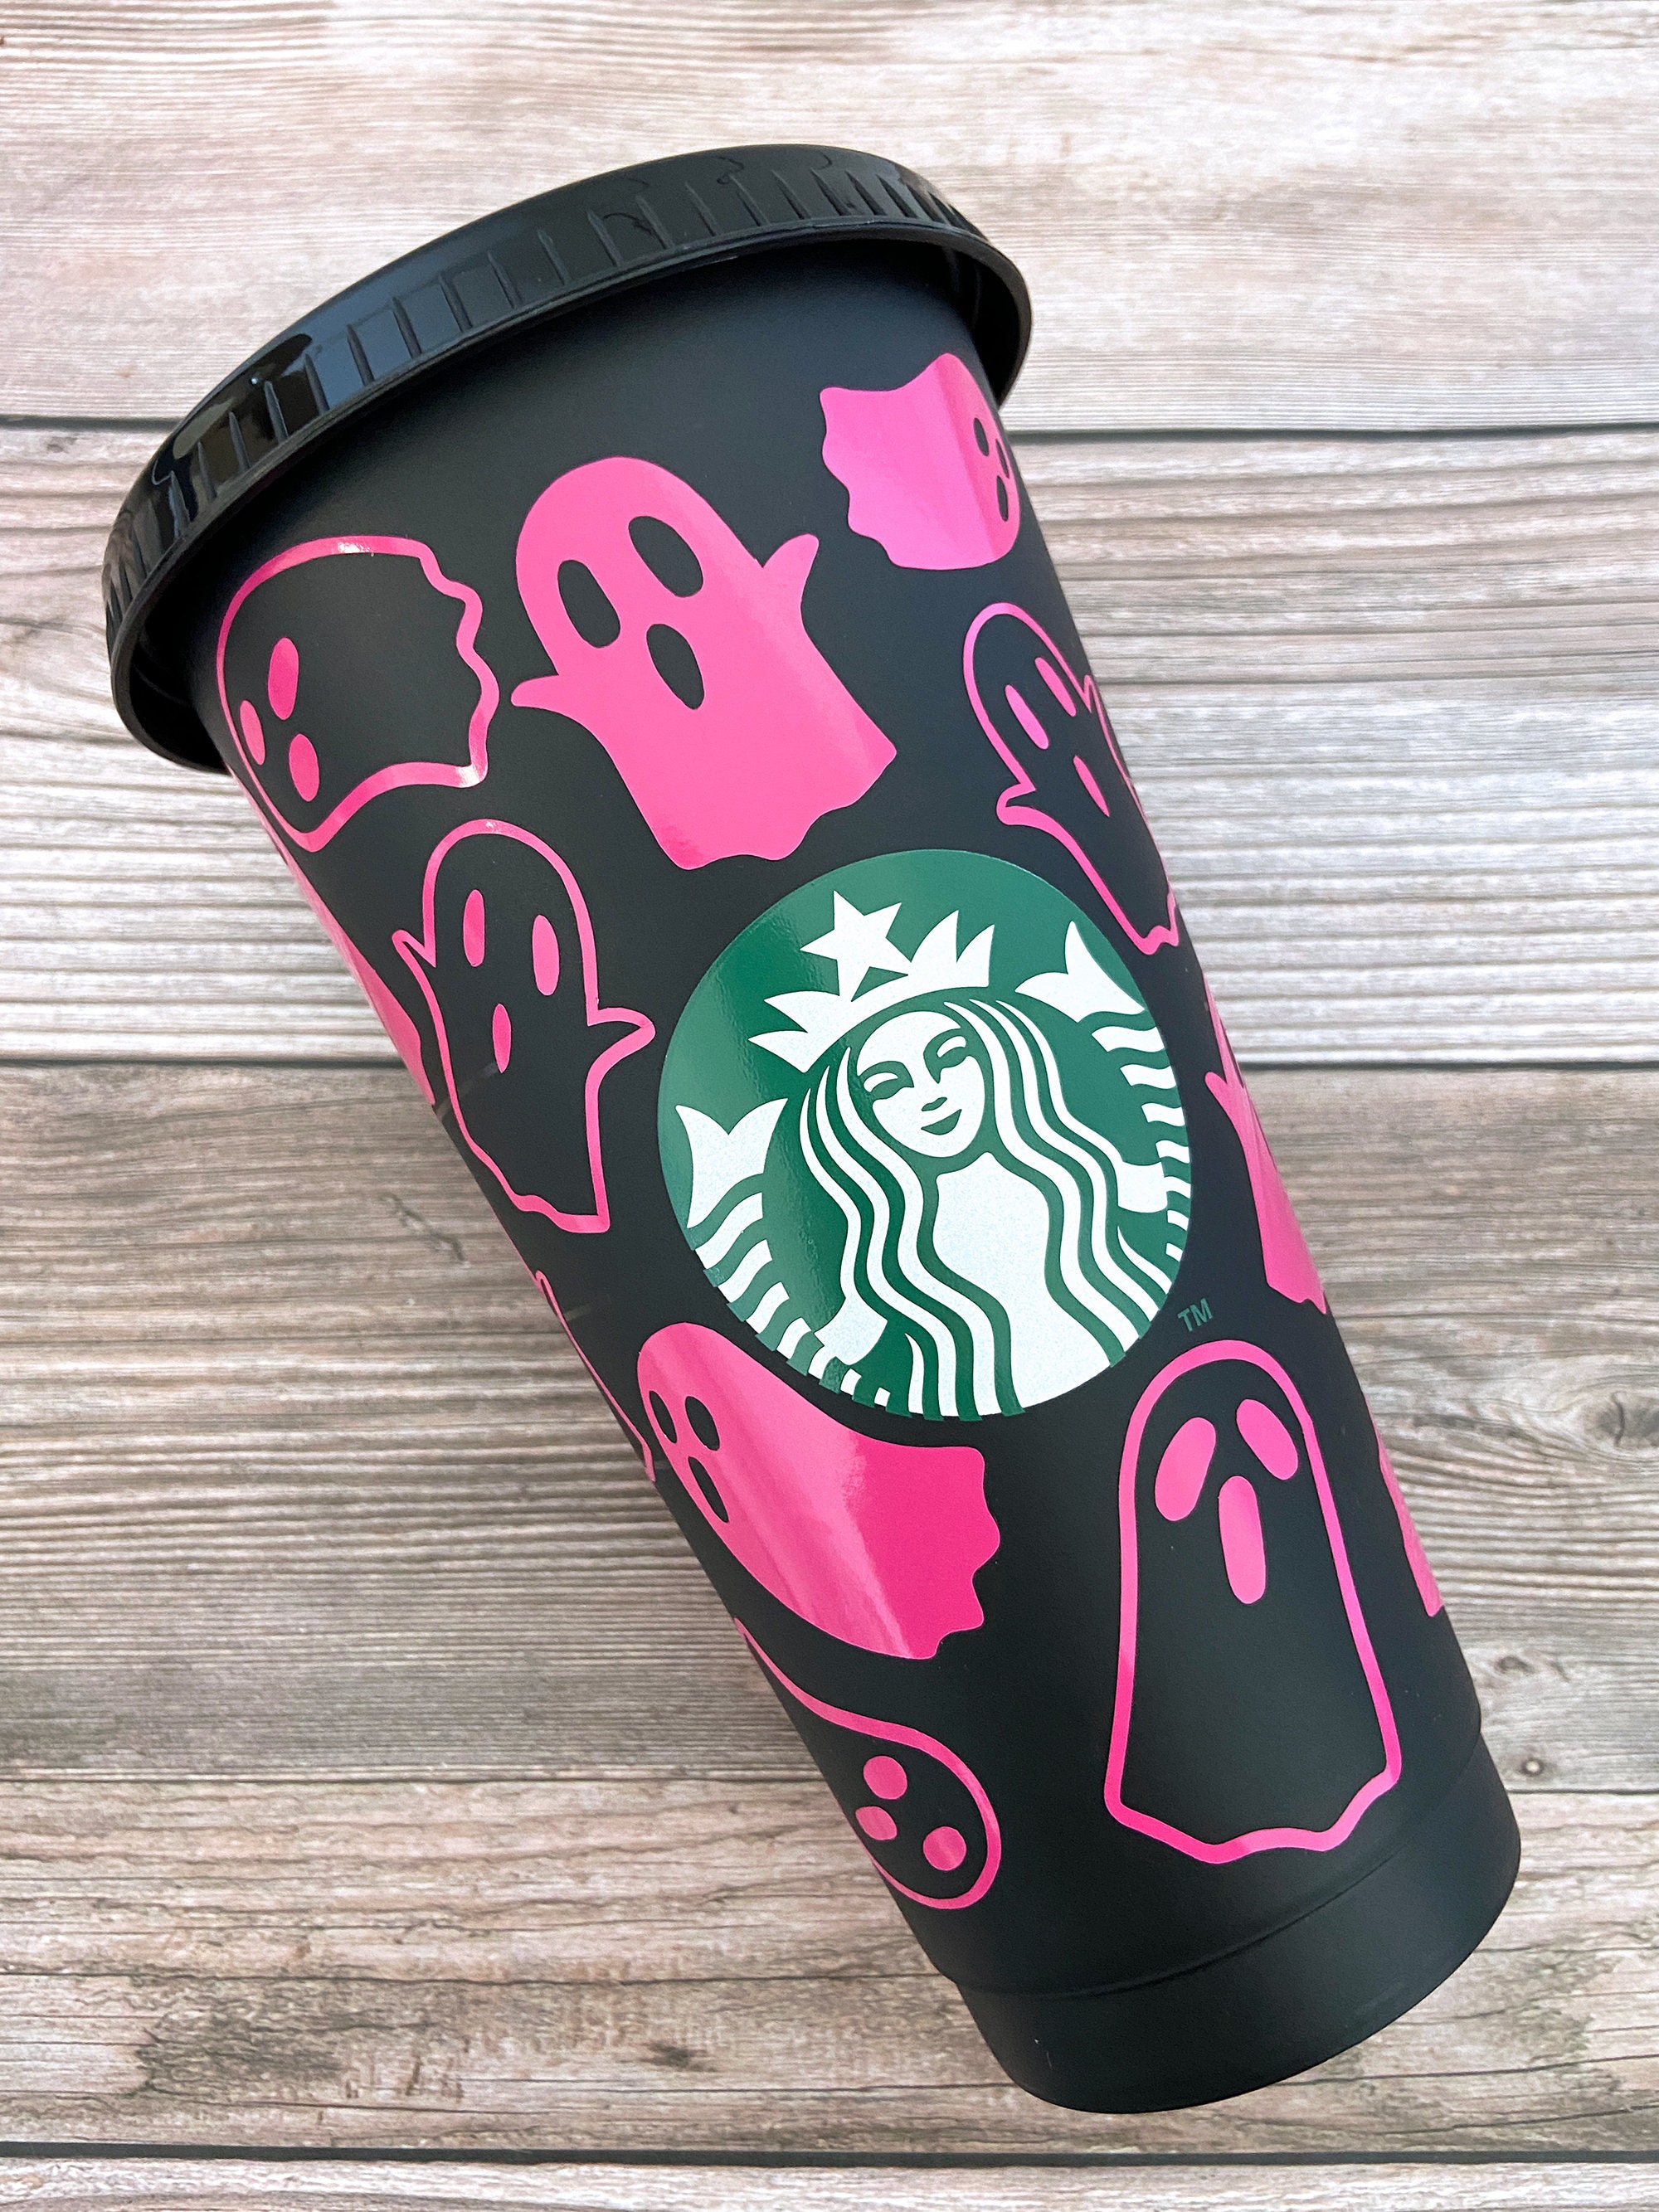 Ghost Cup Spooky Glow in the Dark Cup Halloween Starbucks Cup Halloween Cup  Glow in the Dark Gift Venti Cold Cup Halloween 